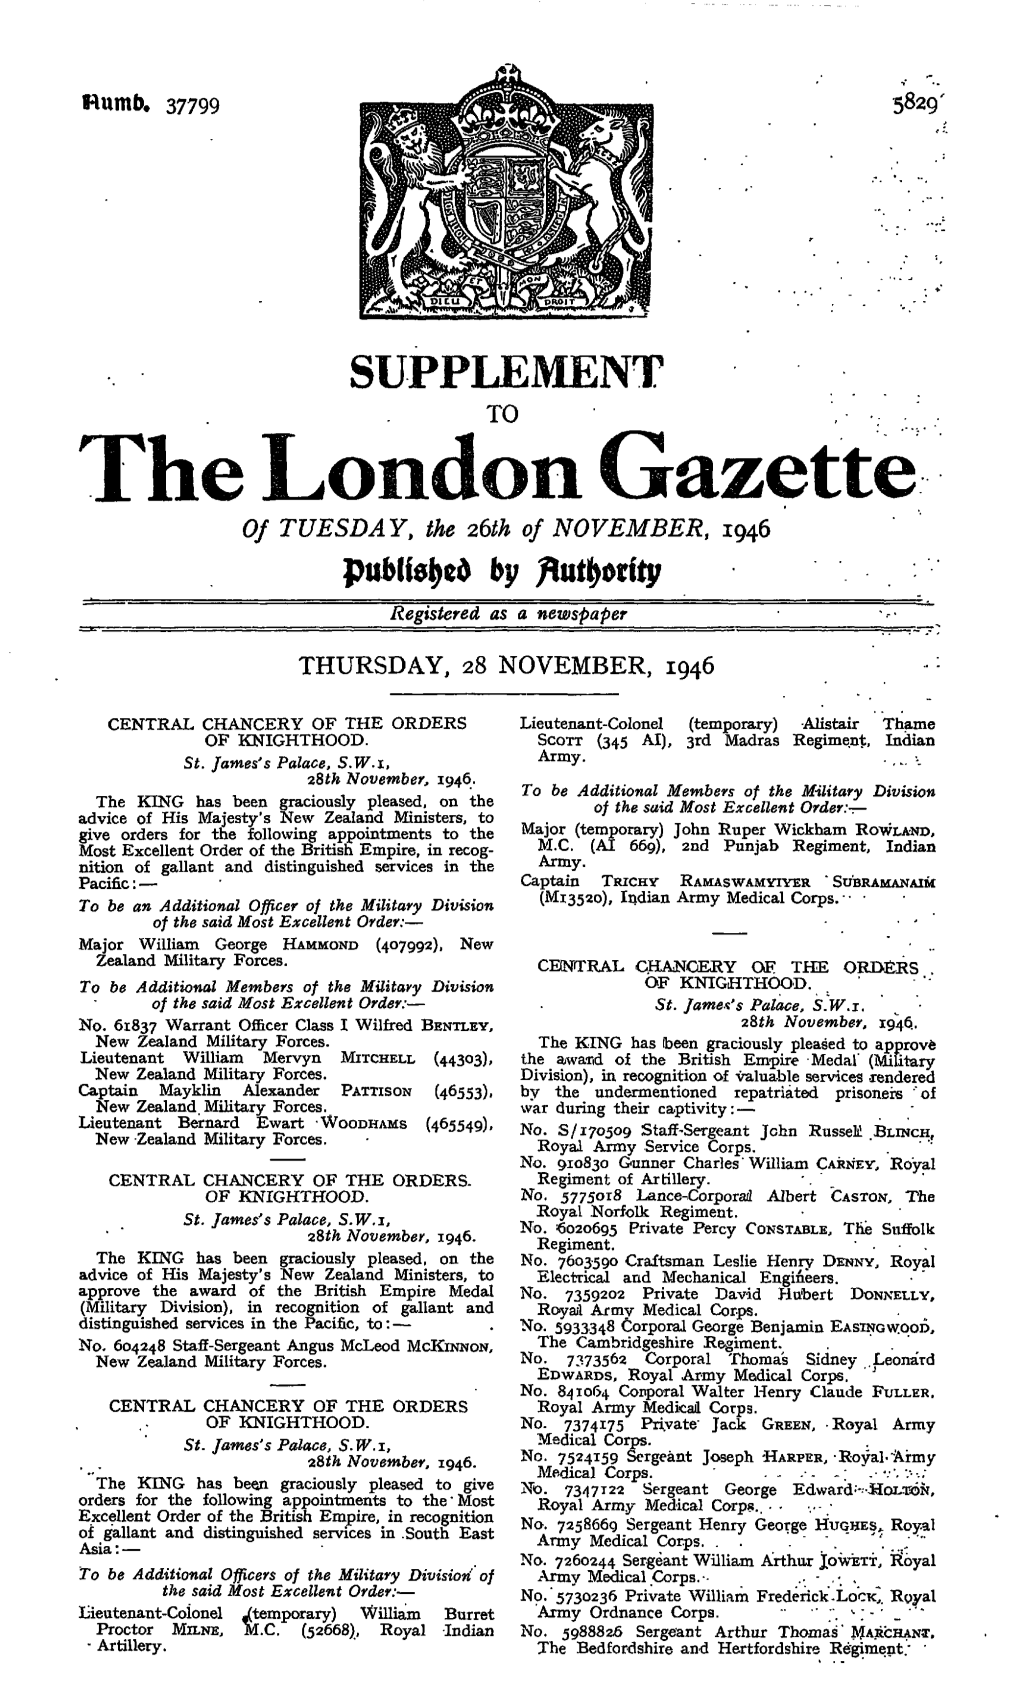 The London Gazette of TUESDAY, the 26Th of NOVEMBER, 1946 by Fiutfymty Registered As a Newspaper